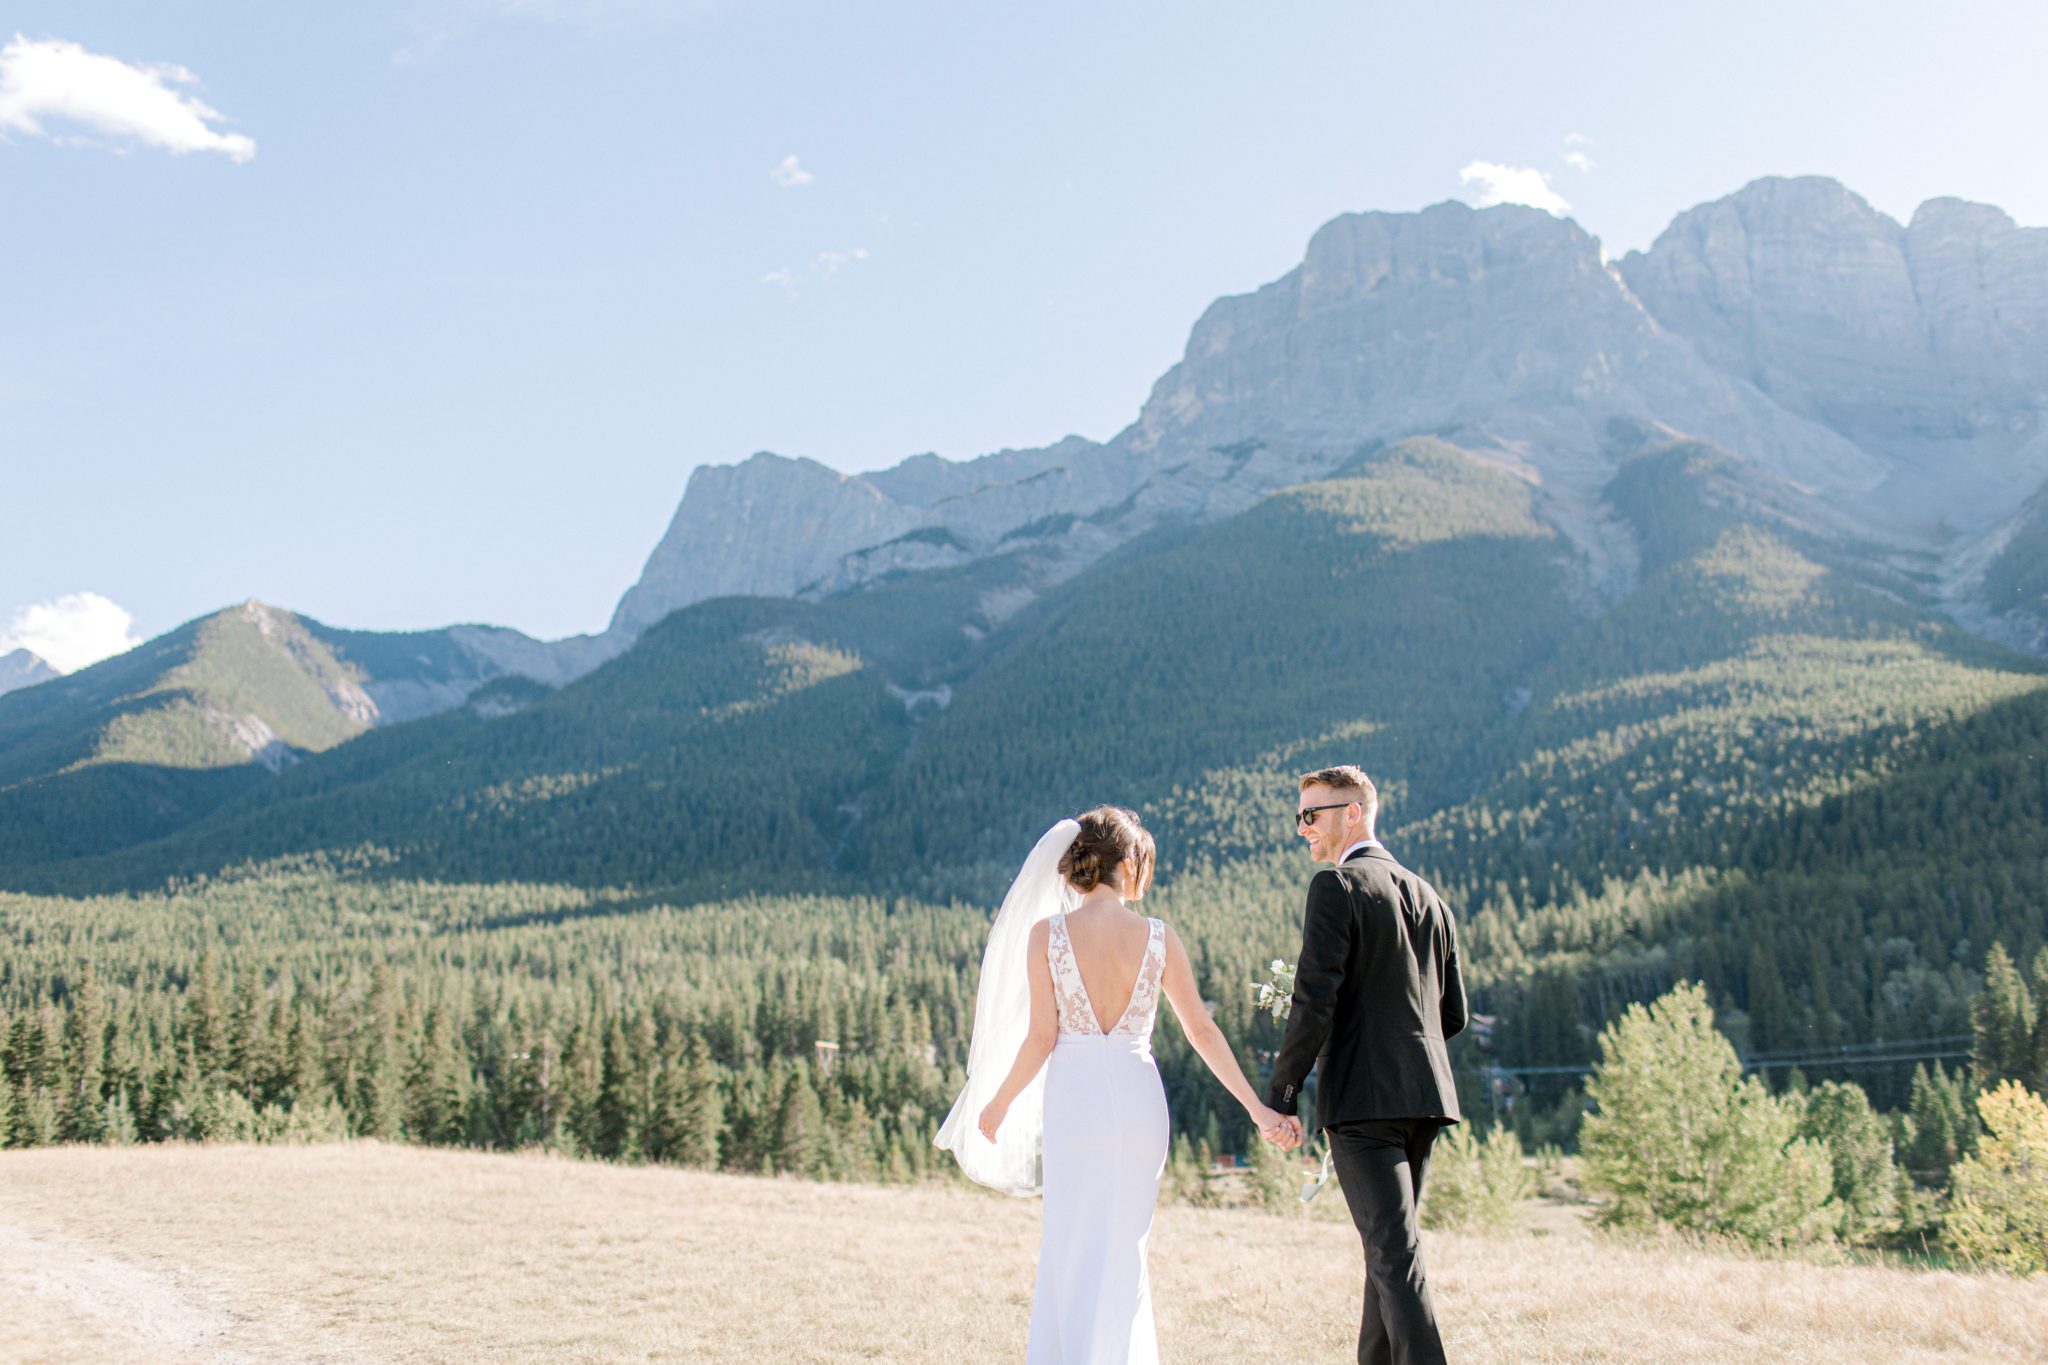 Outdoor wedding in Canmore, Alberta features Chic crepe wedding dress.